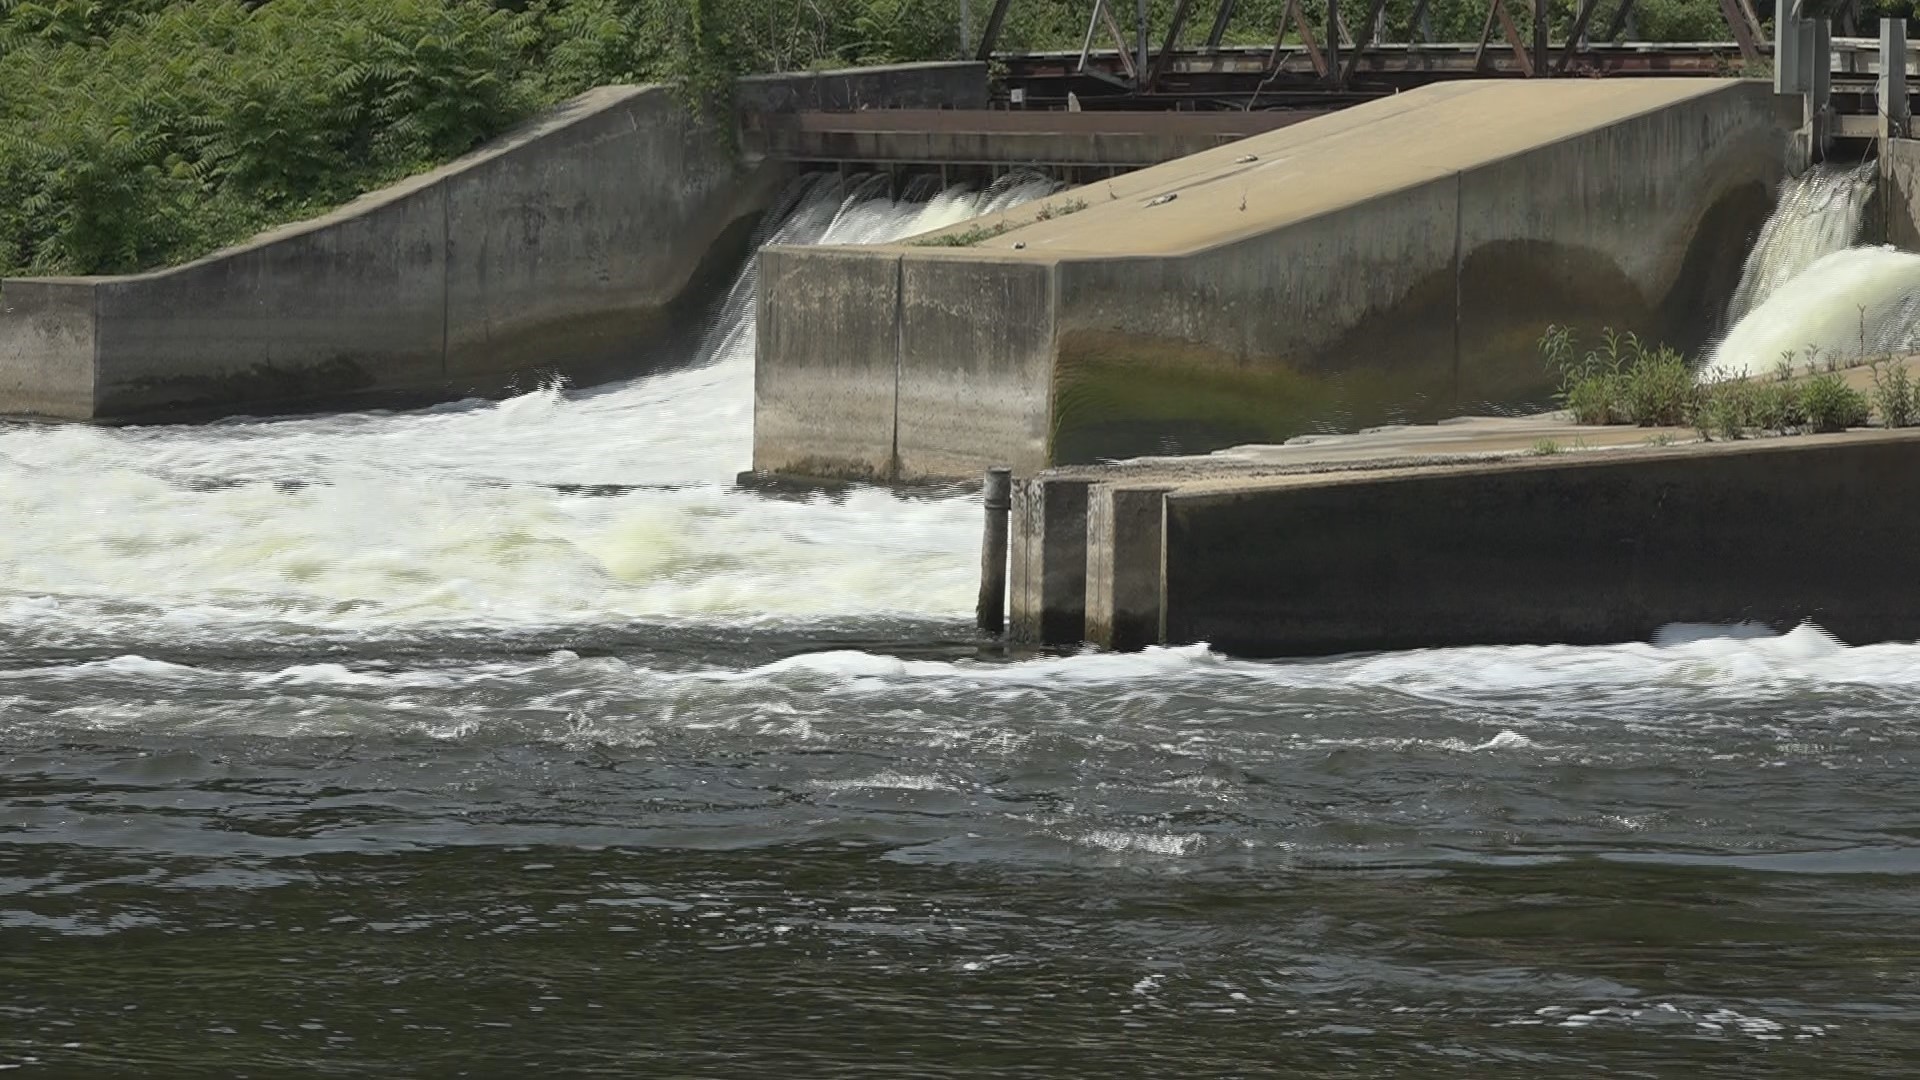 A handful of West Michigan cities are getting much-needed funding to repair dams thanks to the Dam Risk Reduction Program.